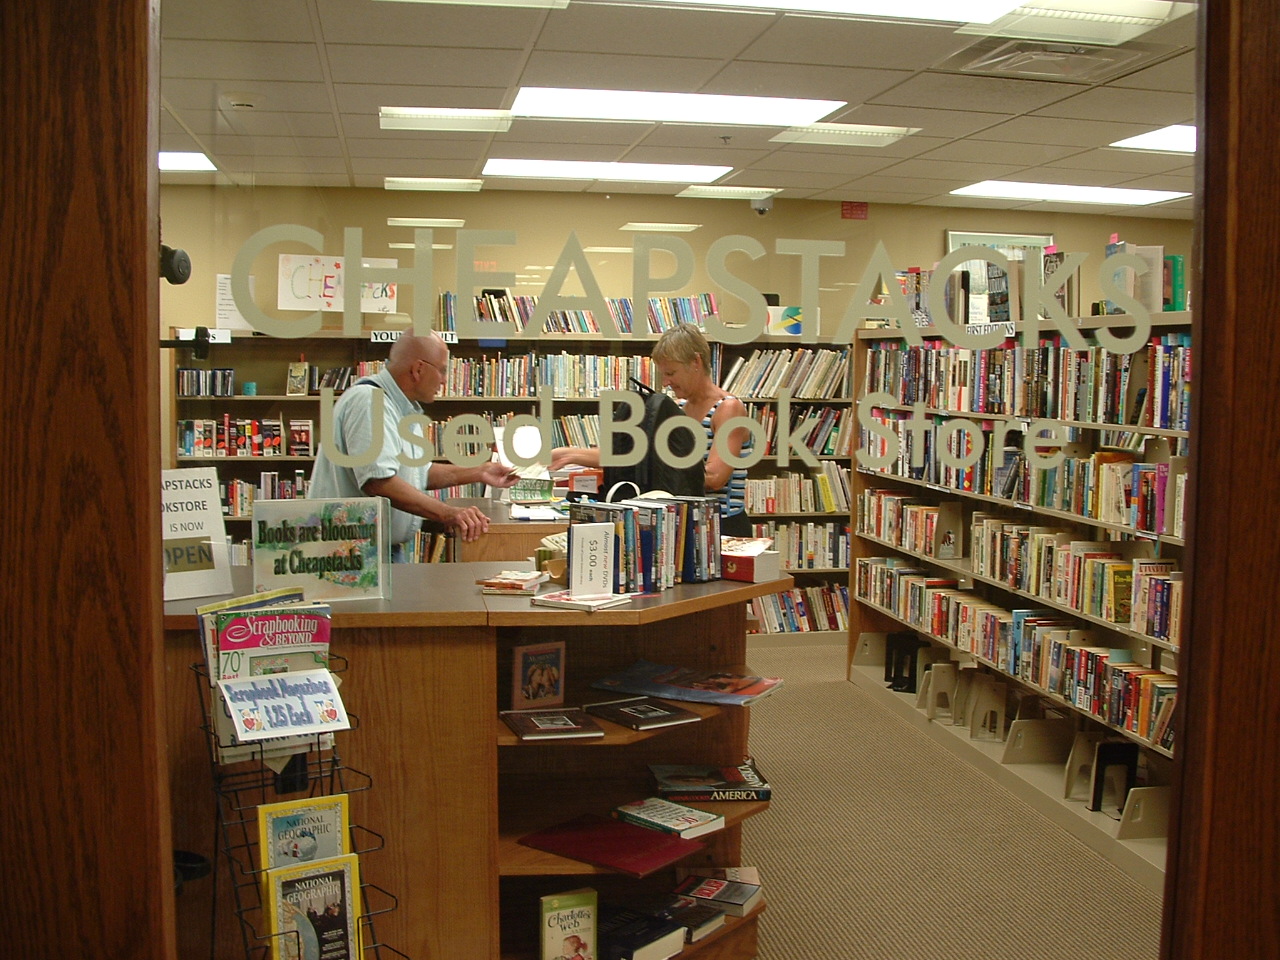 Image of Cheapstacks Used Bookstore front door. Bookshelves, a patron checking out a book, and a volunteer assisting the patron can be seen through the door's glass.